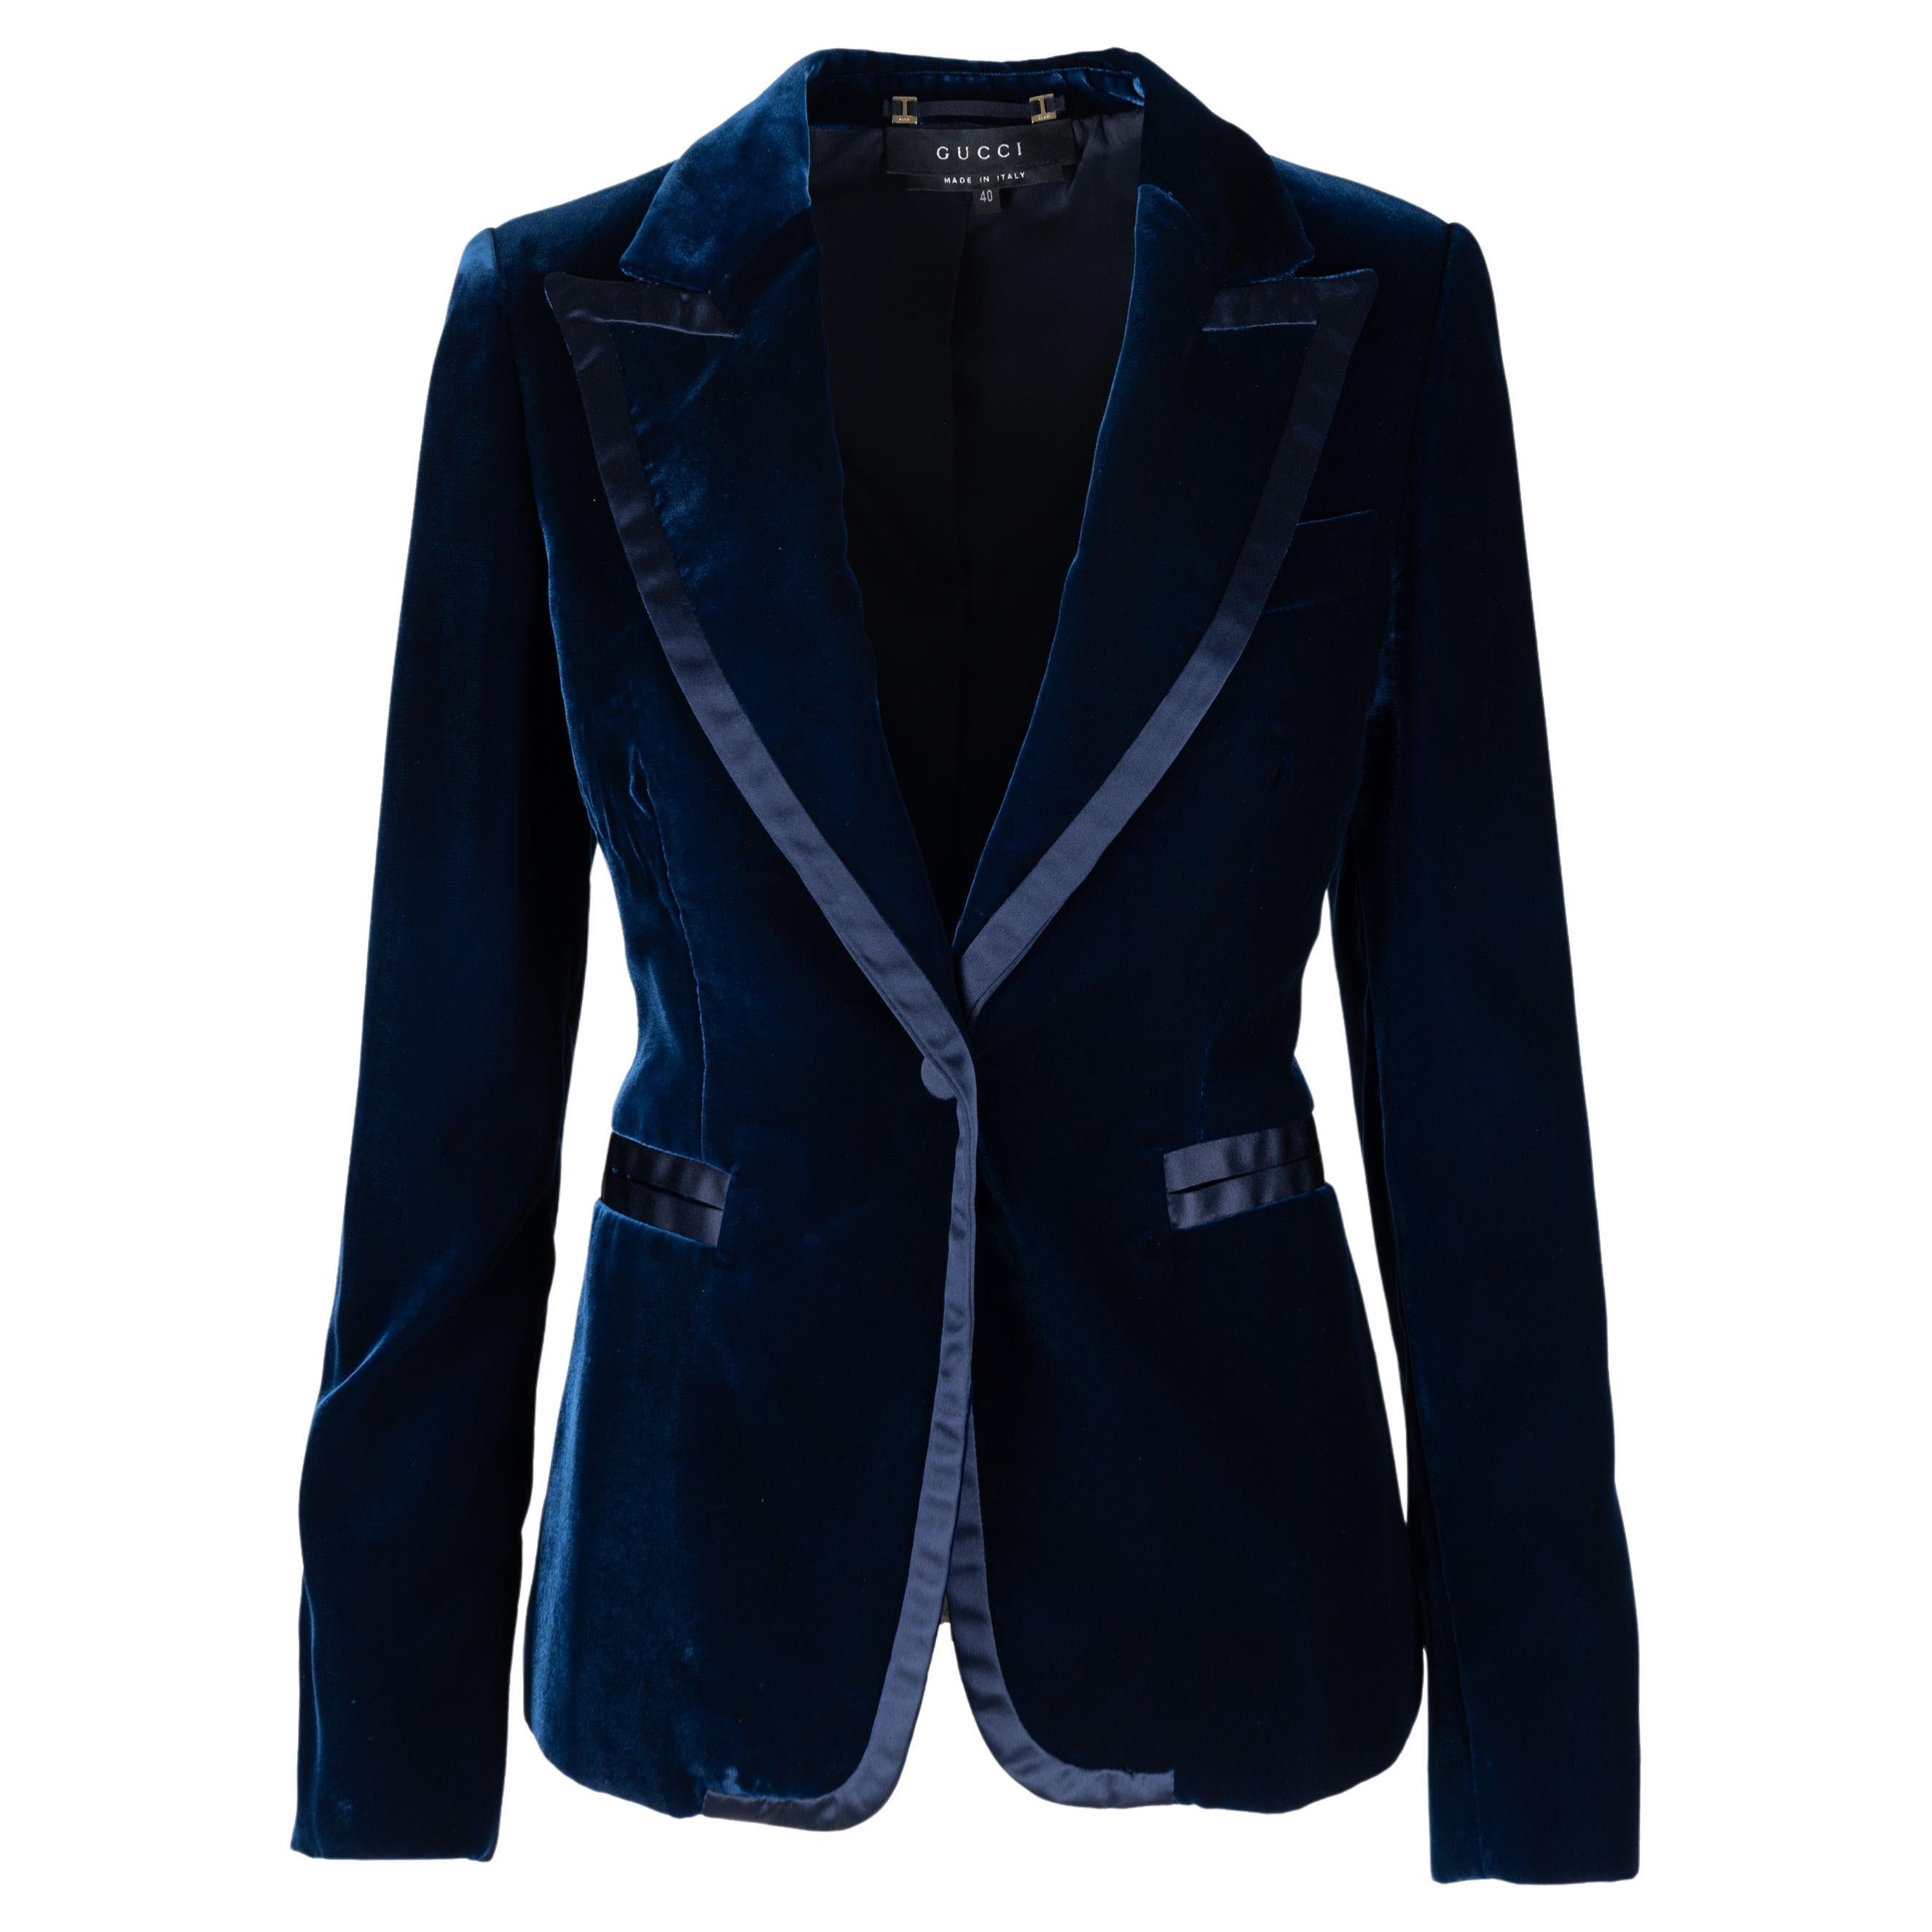 Gucci Tom Ford's 1996 Fall/Winter Collection Velvet Blazer For Sale